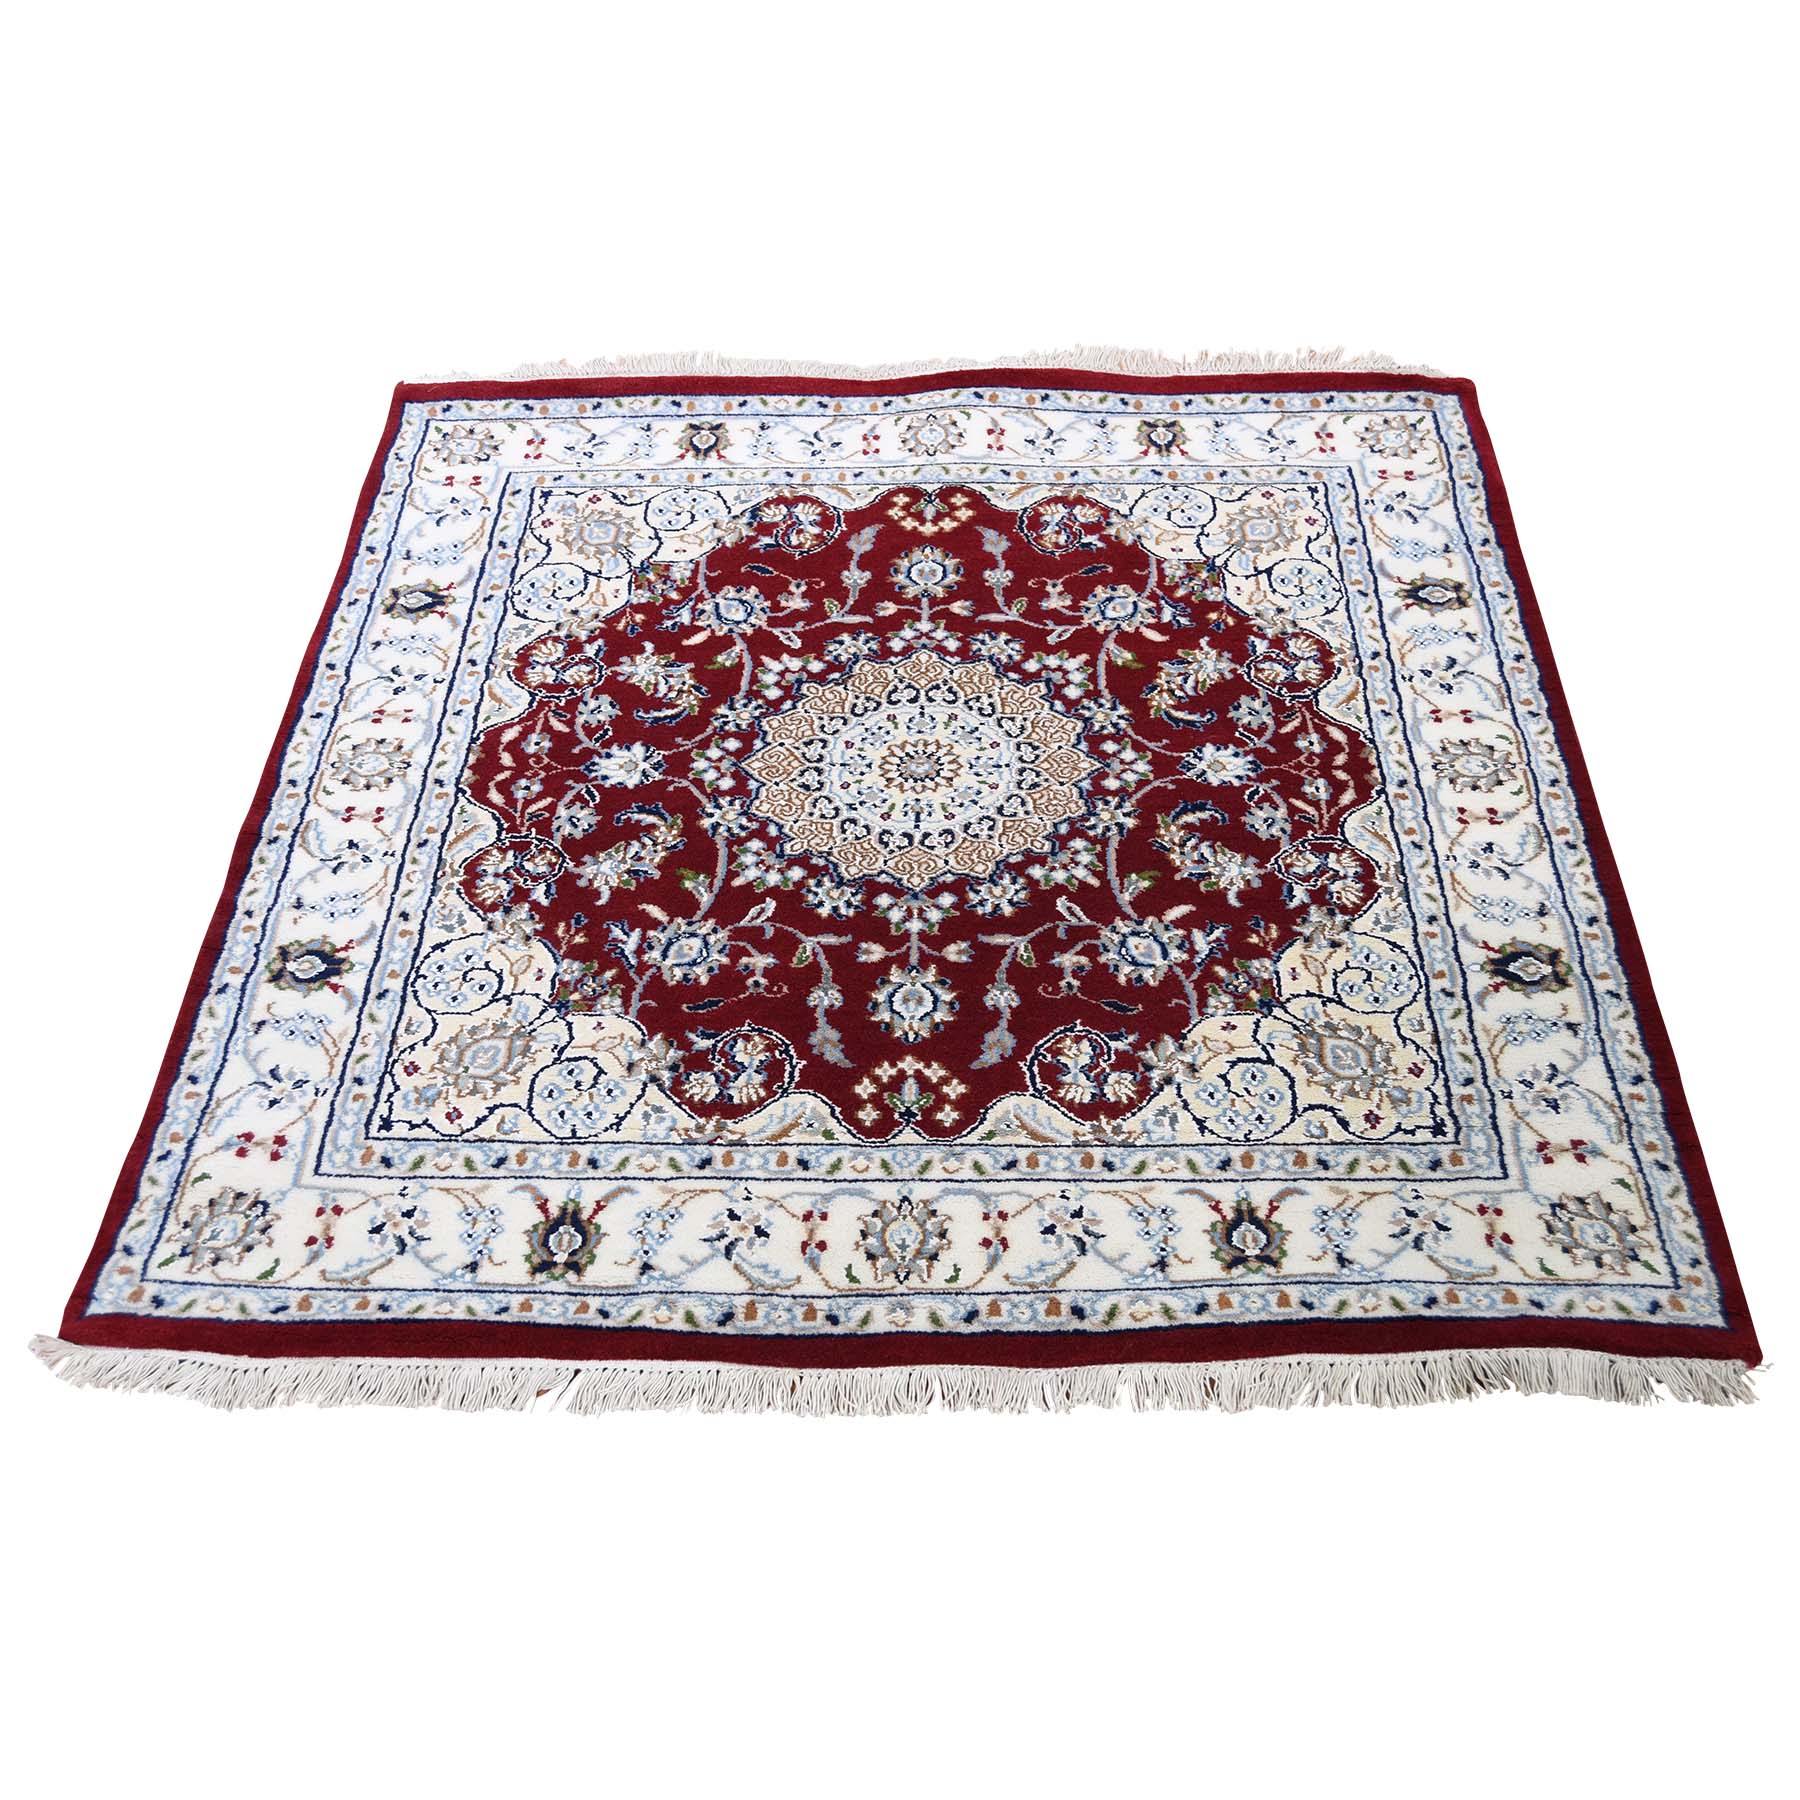 3'10"x3'10" Wool And Silk 250 Kpsi Red Square Nain Hand Woven Oriental Rug 